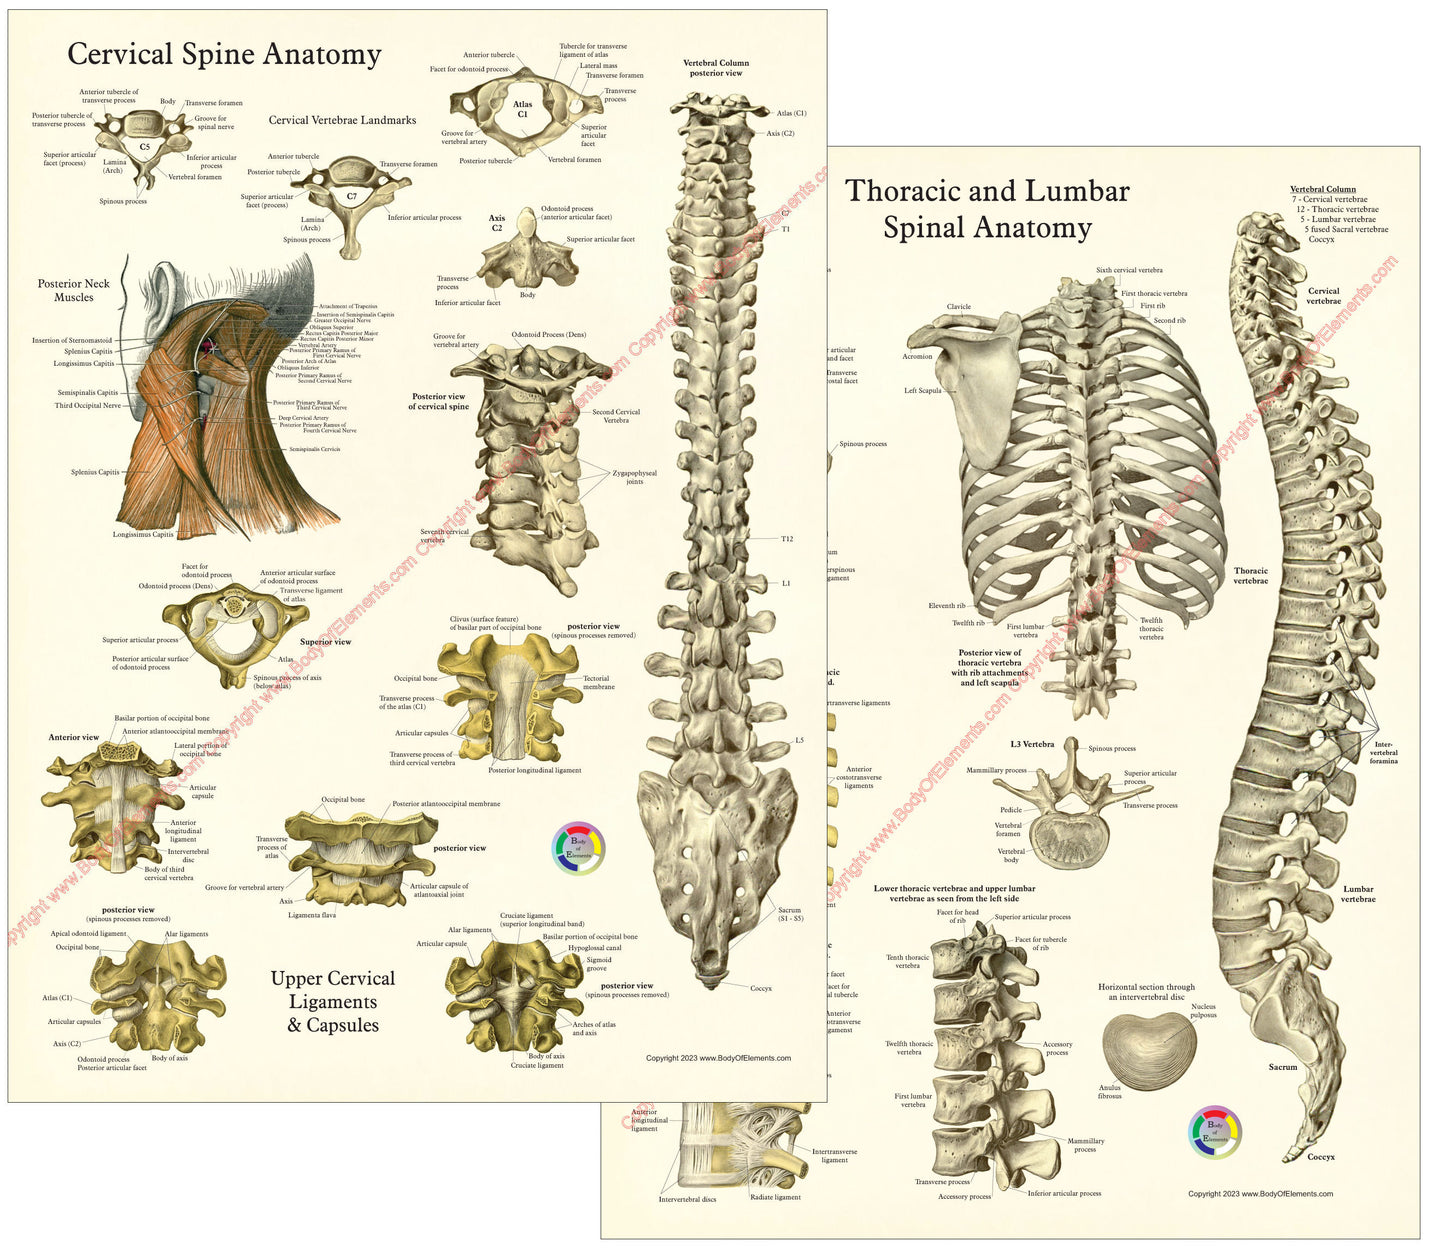 Human spine and ligaments anatomy poster